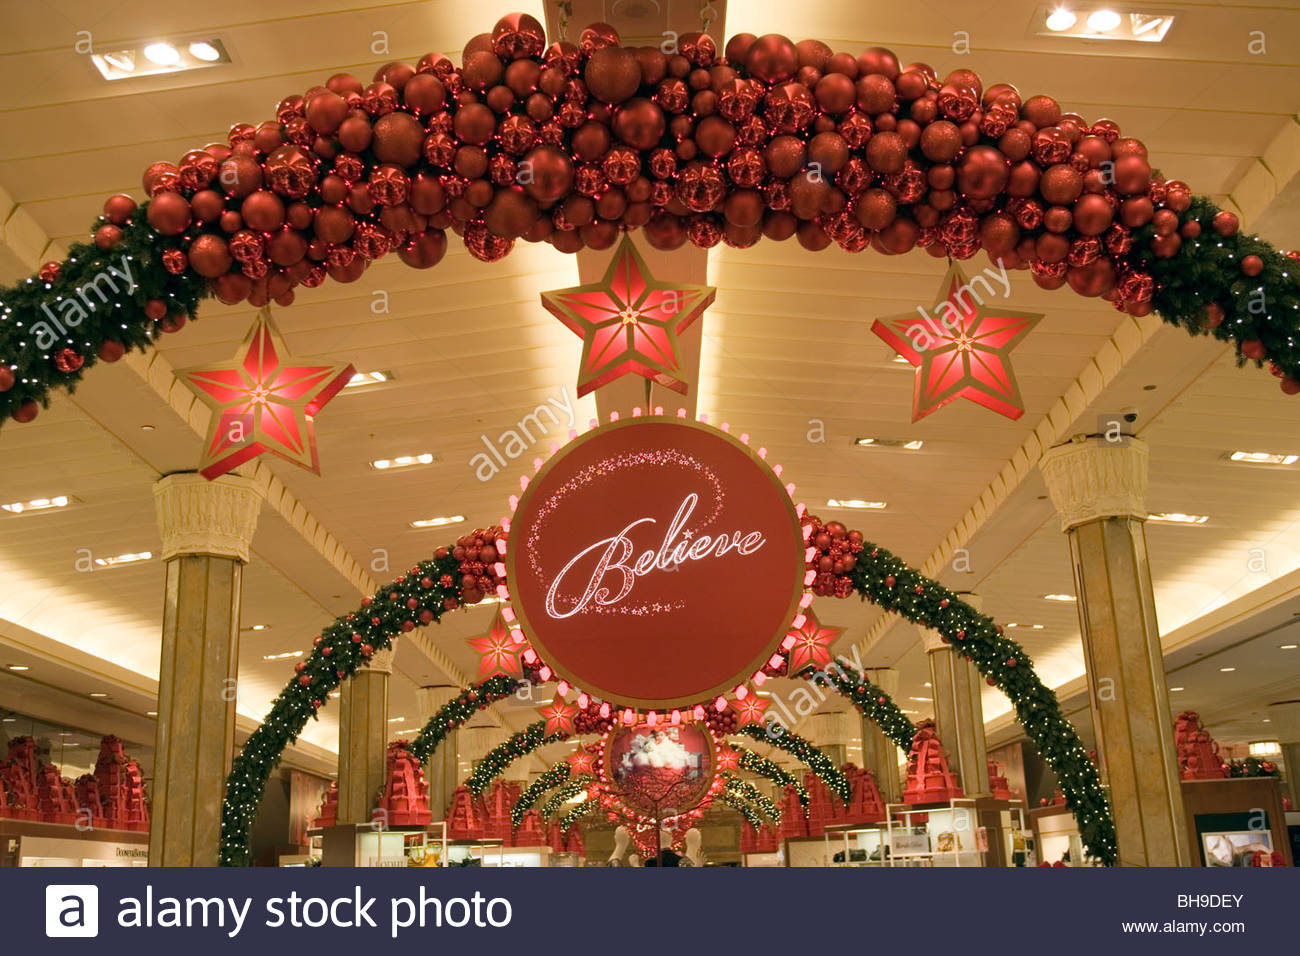 The Macy&#39;s Christmas Believe store decorations Stock Photo: 27867699 - Alamy